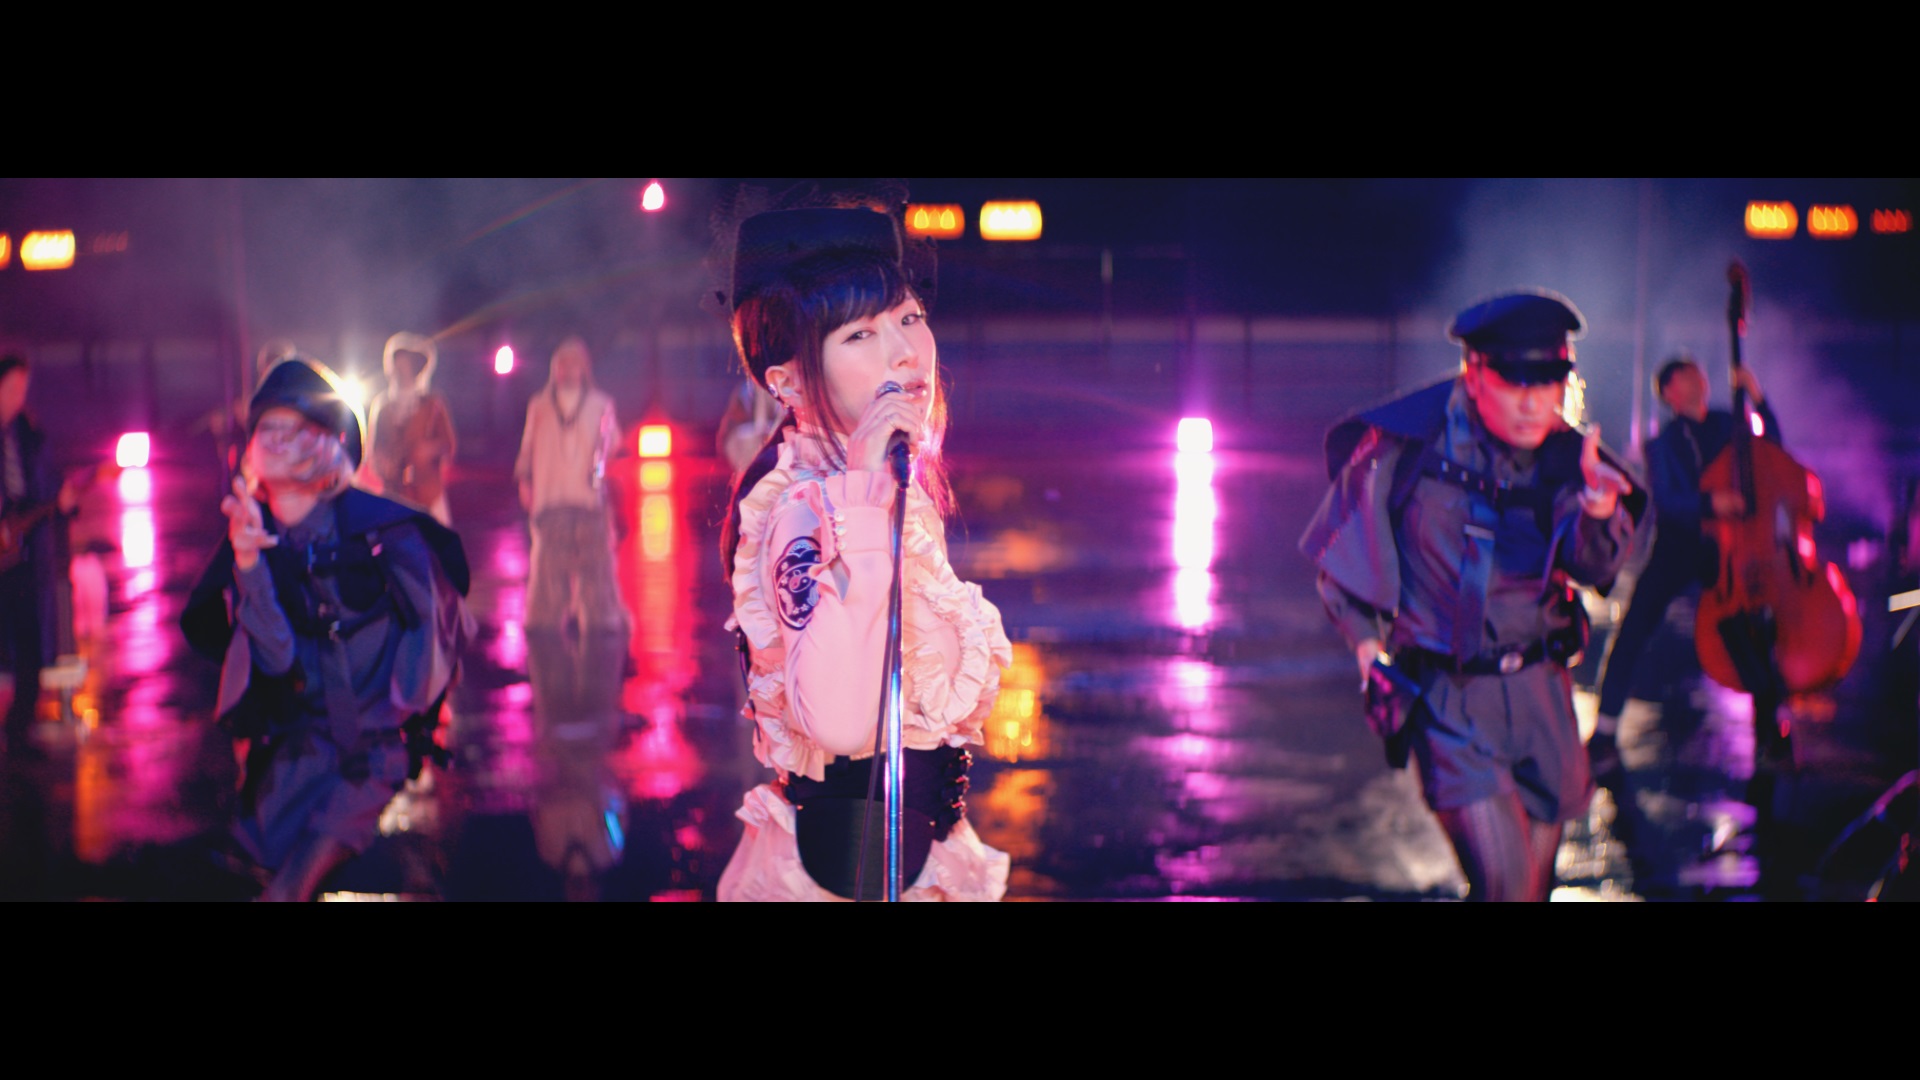 Music Video For Time Limit Investigator Theme Song By Ringo Sheena Will Hold You Hostage Moshi Moshi Nippon もしもしにっぽん